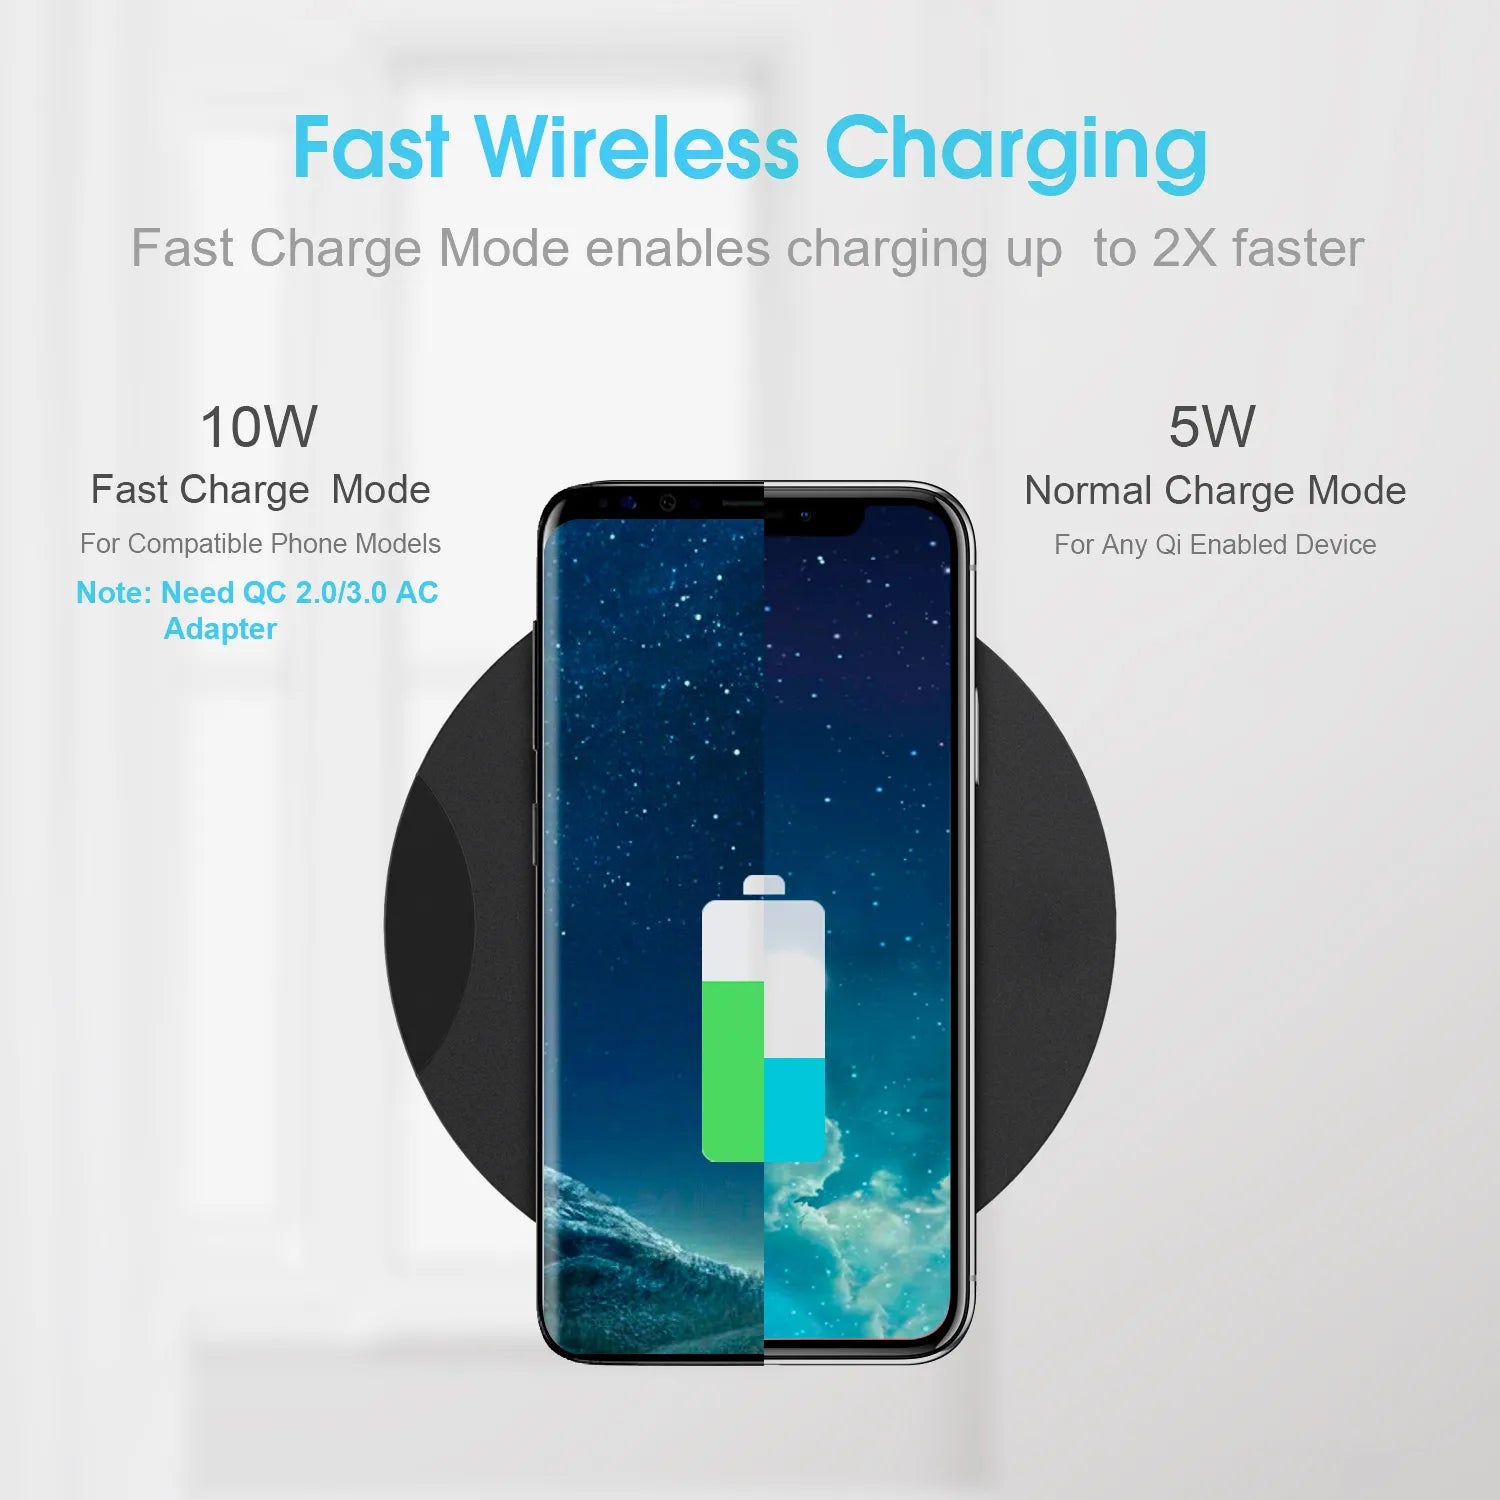 Link Dream Fast Wireless Charging with Headphone Stand 2-in-1 10W Wireless Charger Pad& Headset Holder for PC Accessories Desk